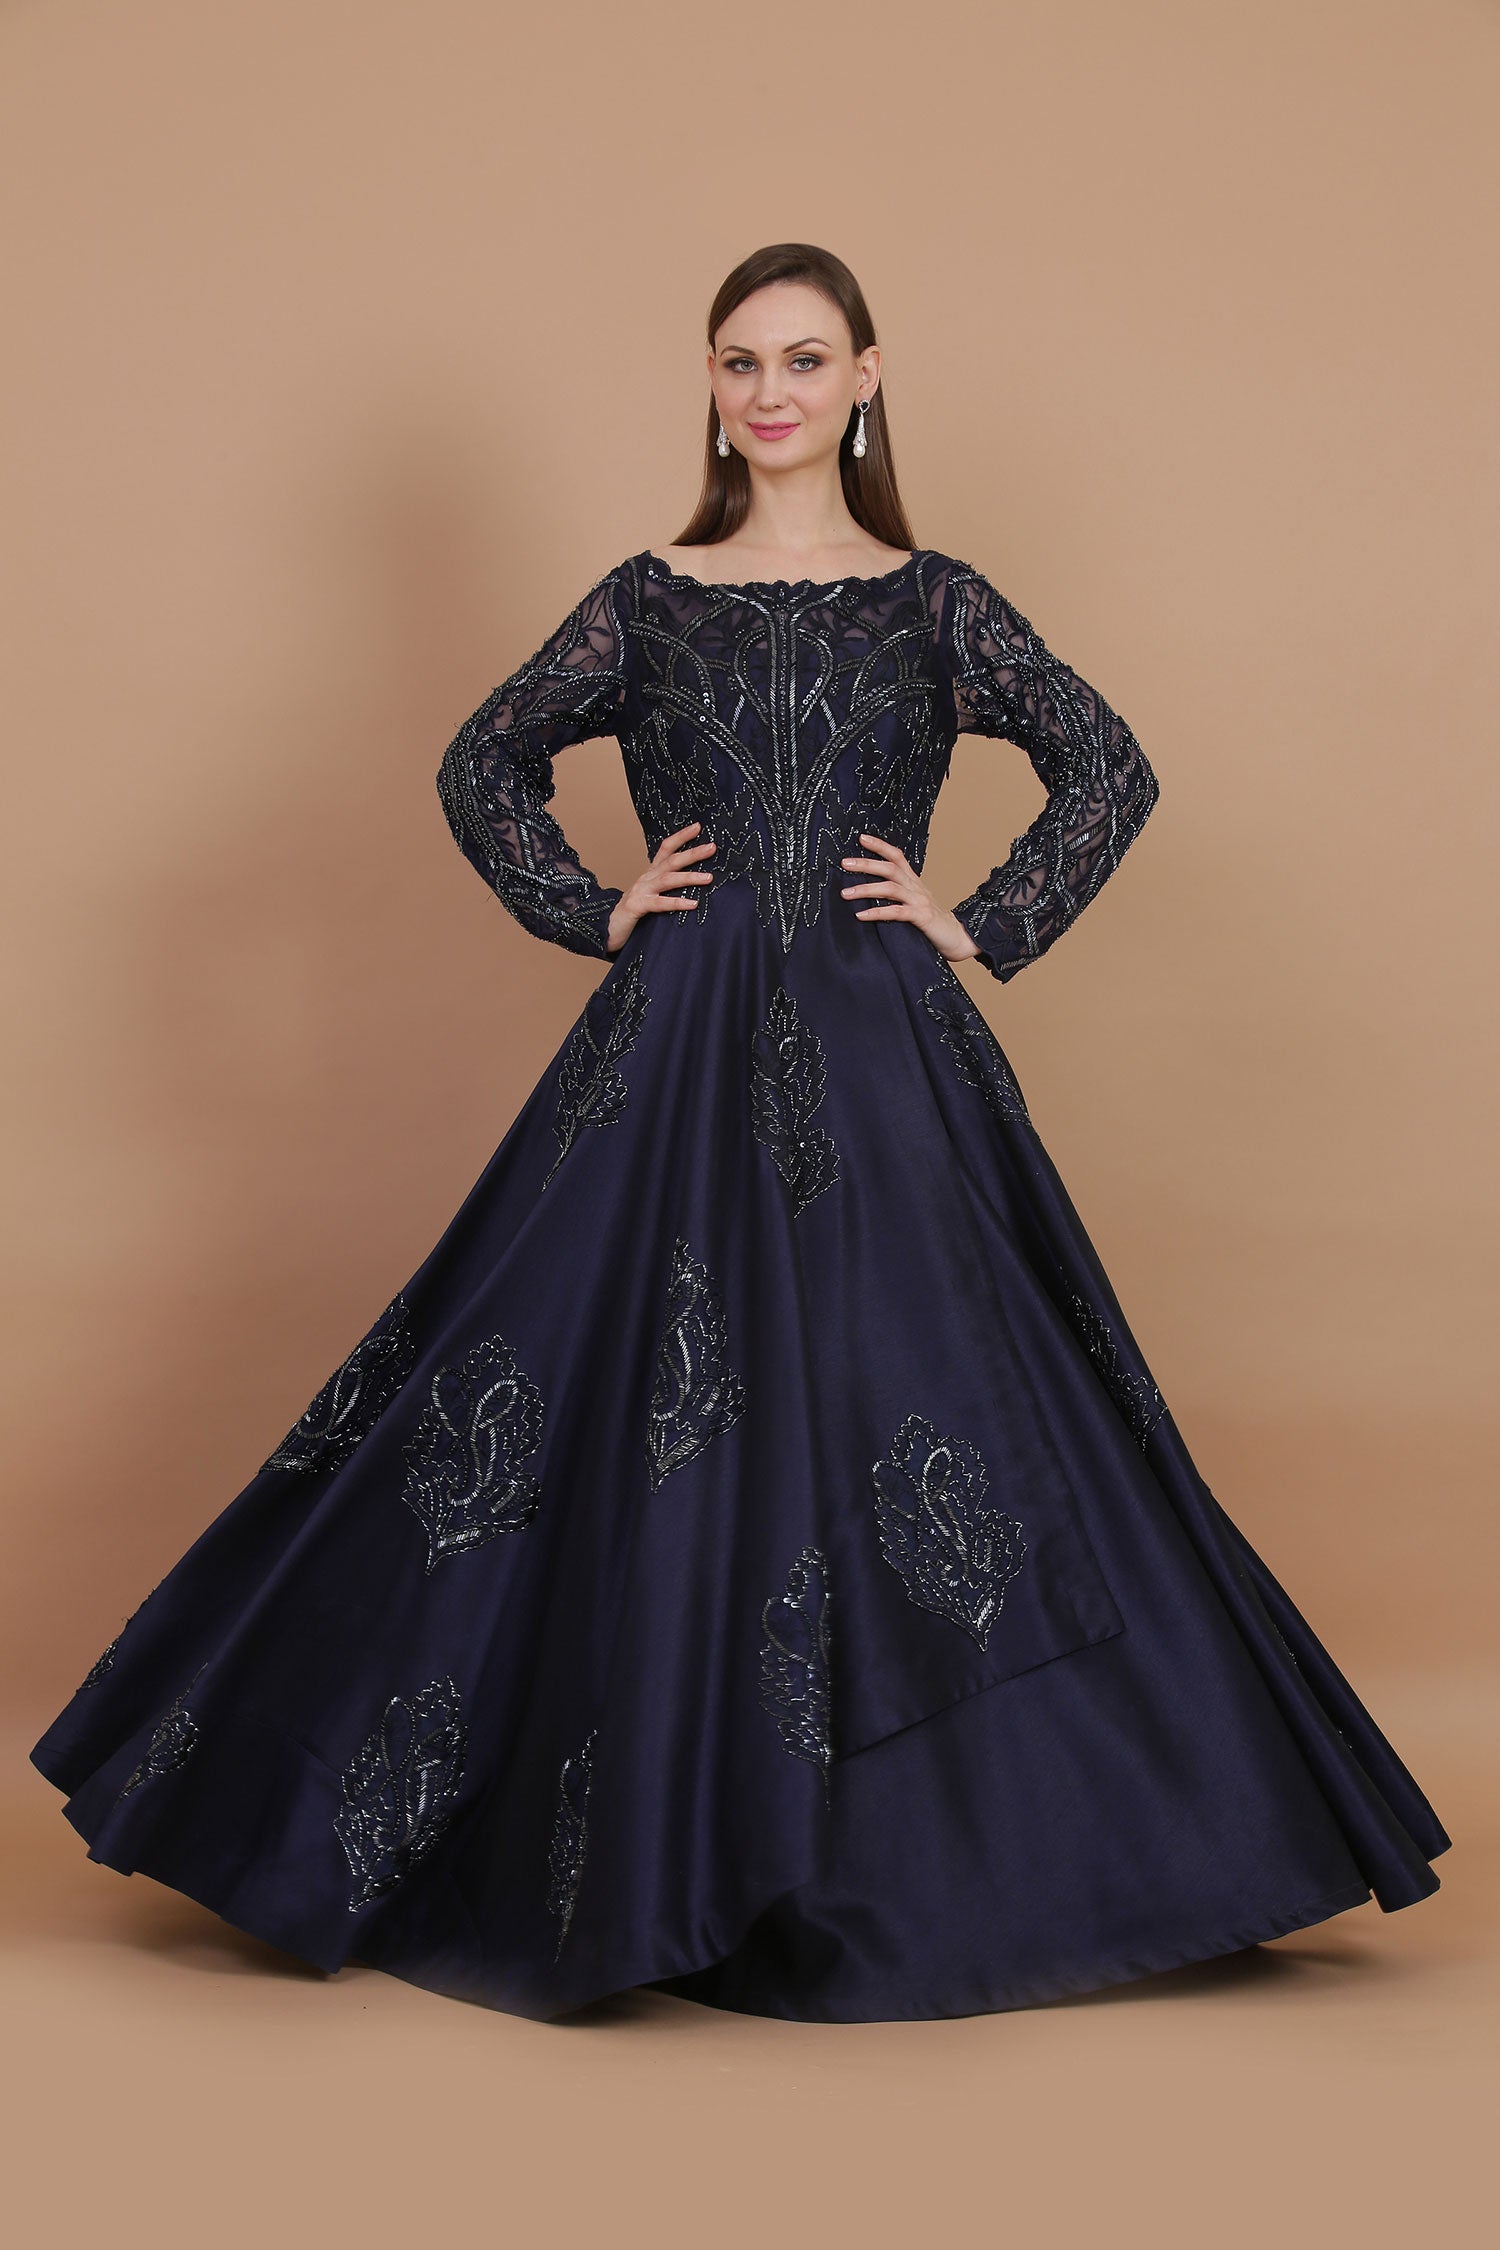 Stunner Gown To Make You Look Gorgeous This Evening